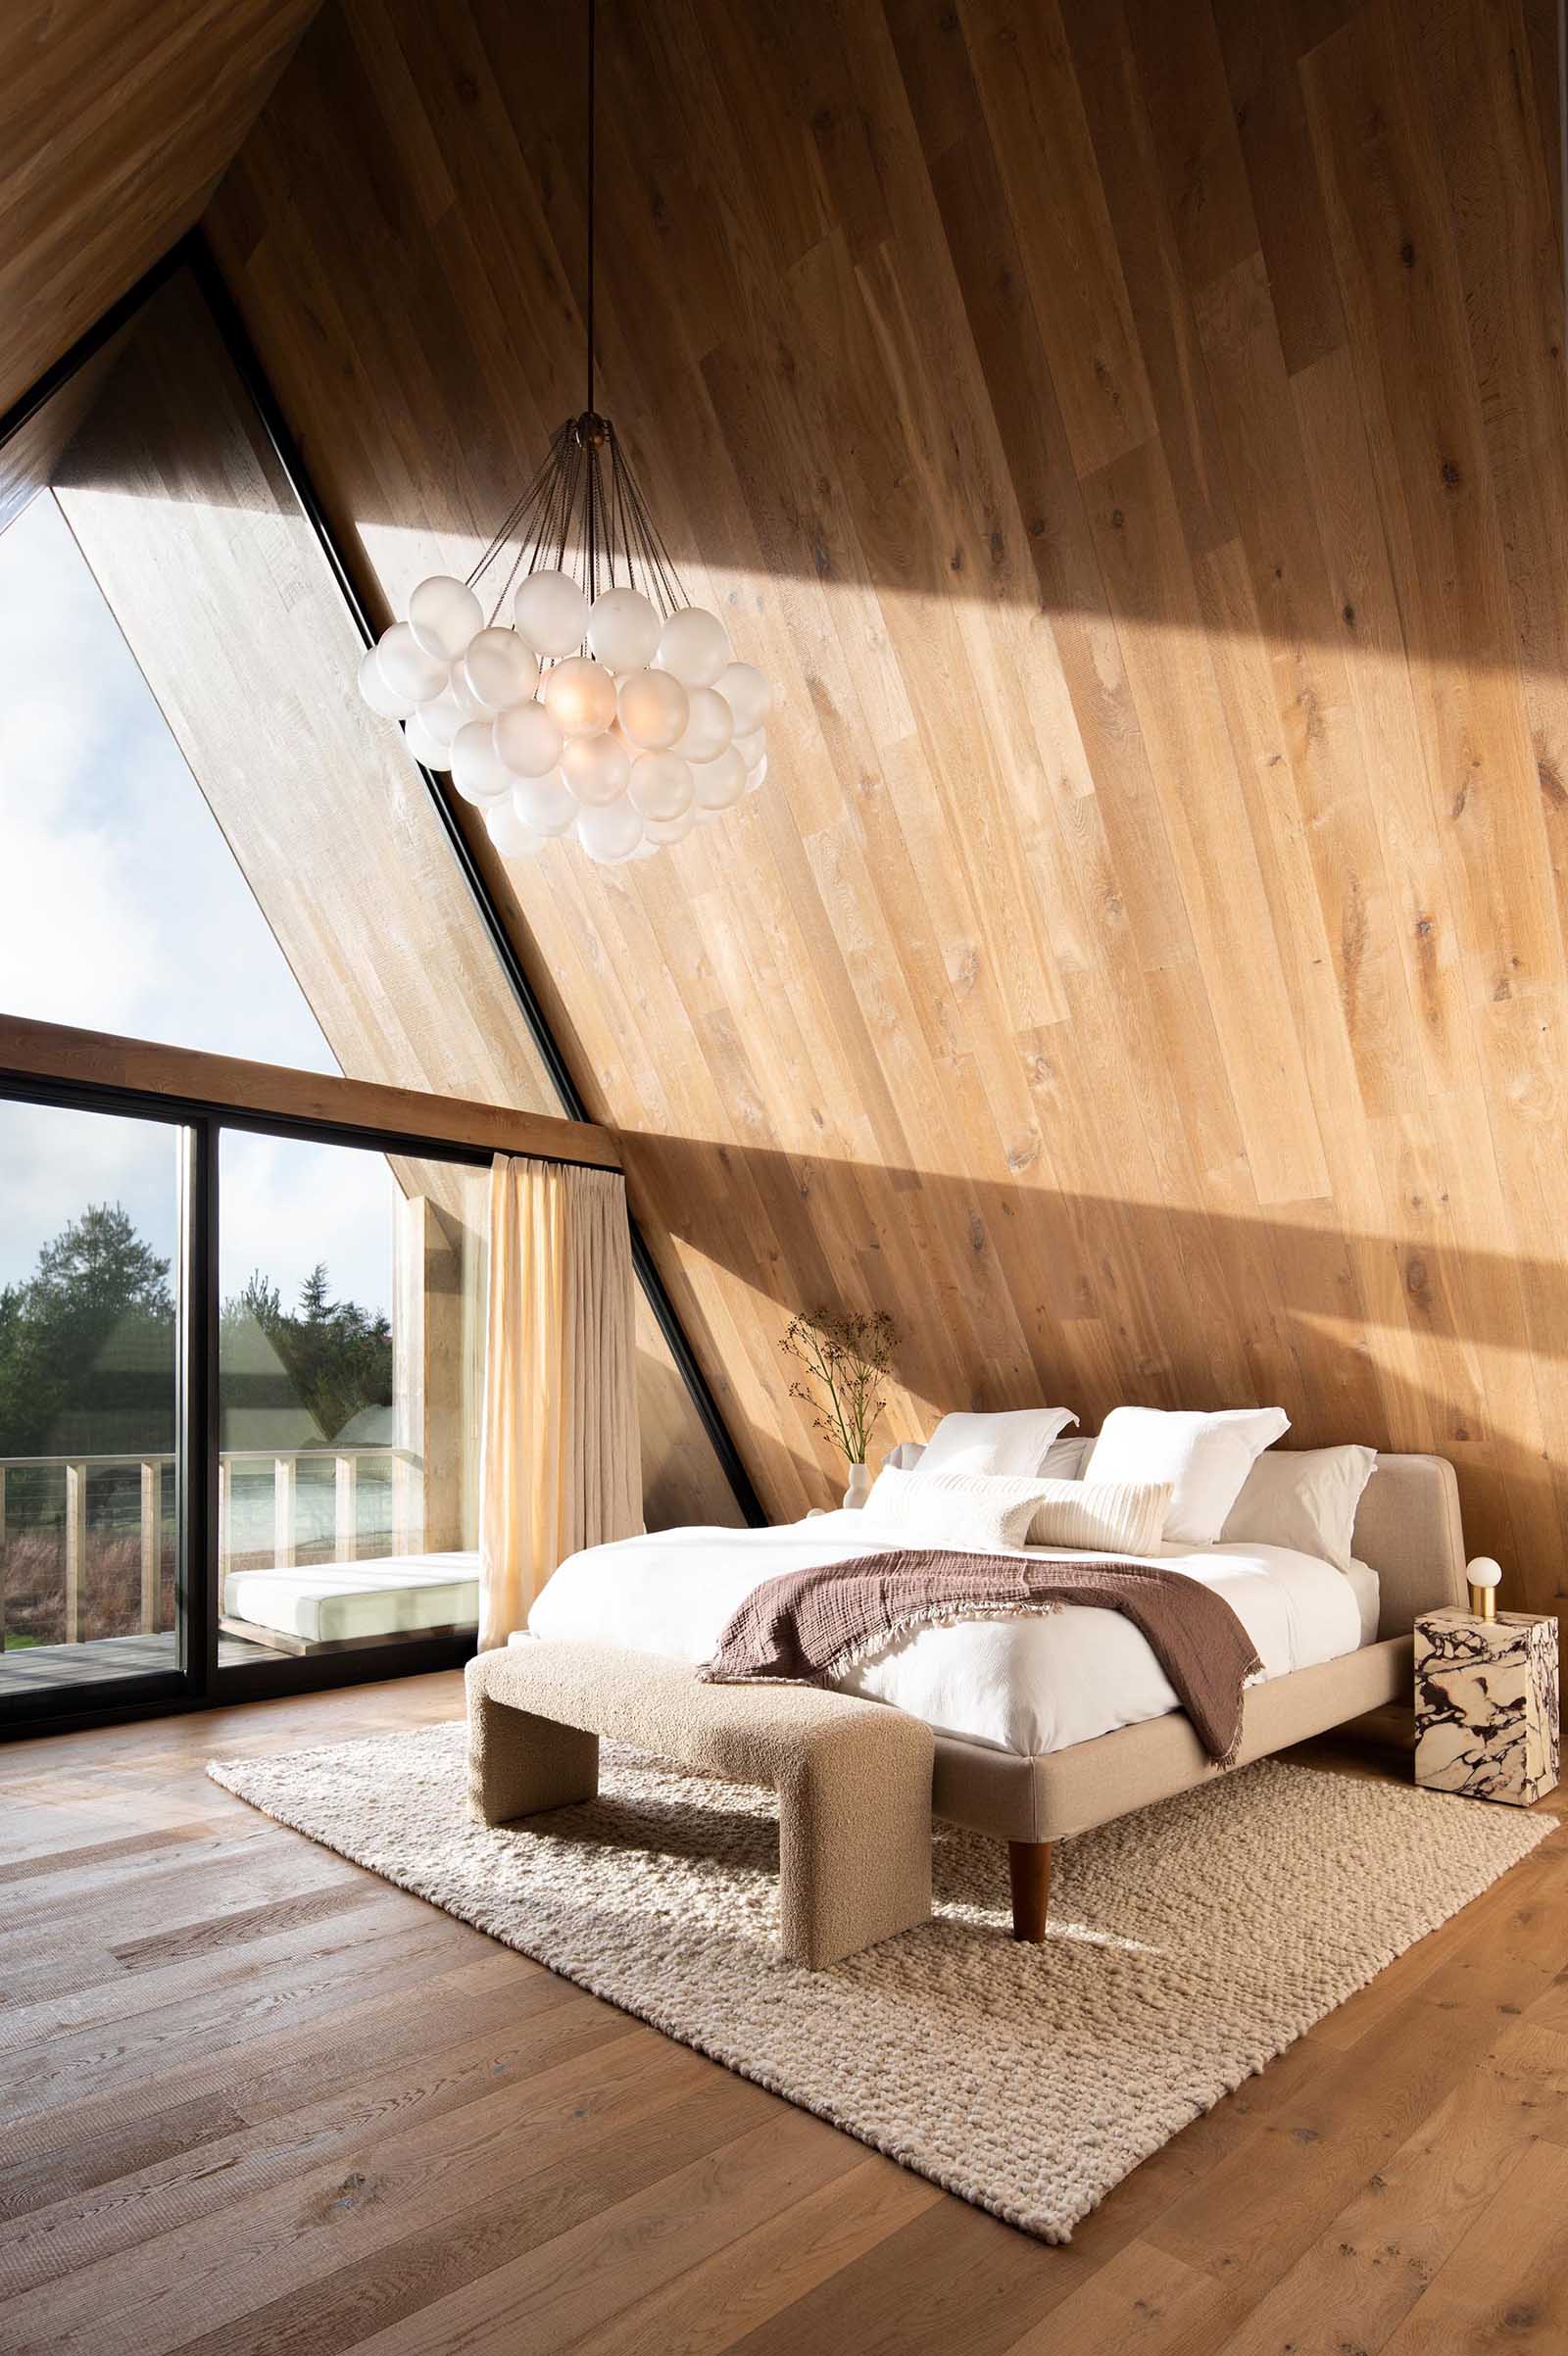 In this modern main bedroom, the steep roof pitch allows for ample natural light to flood the room.